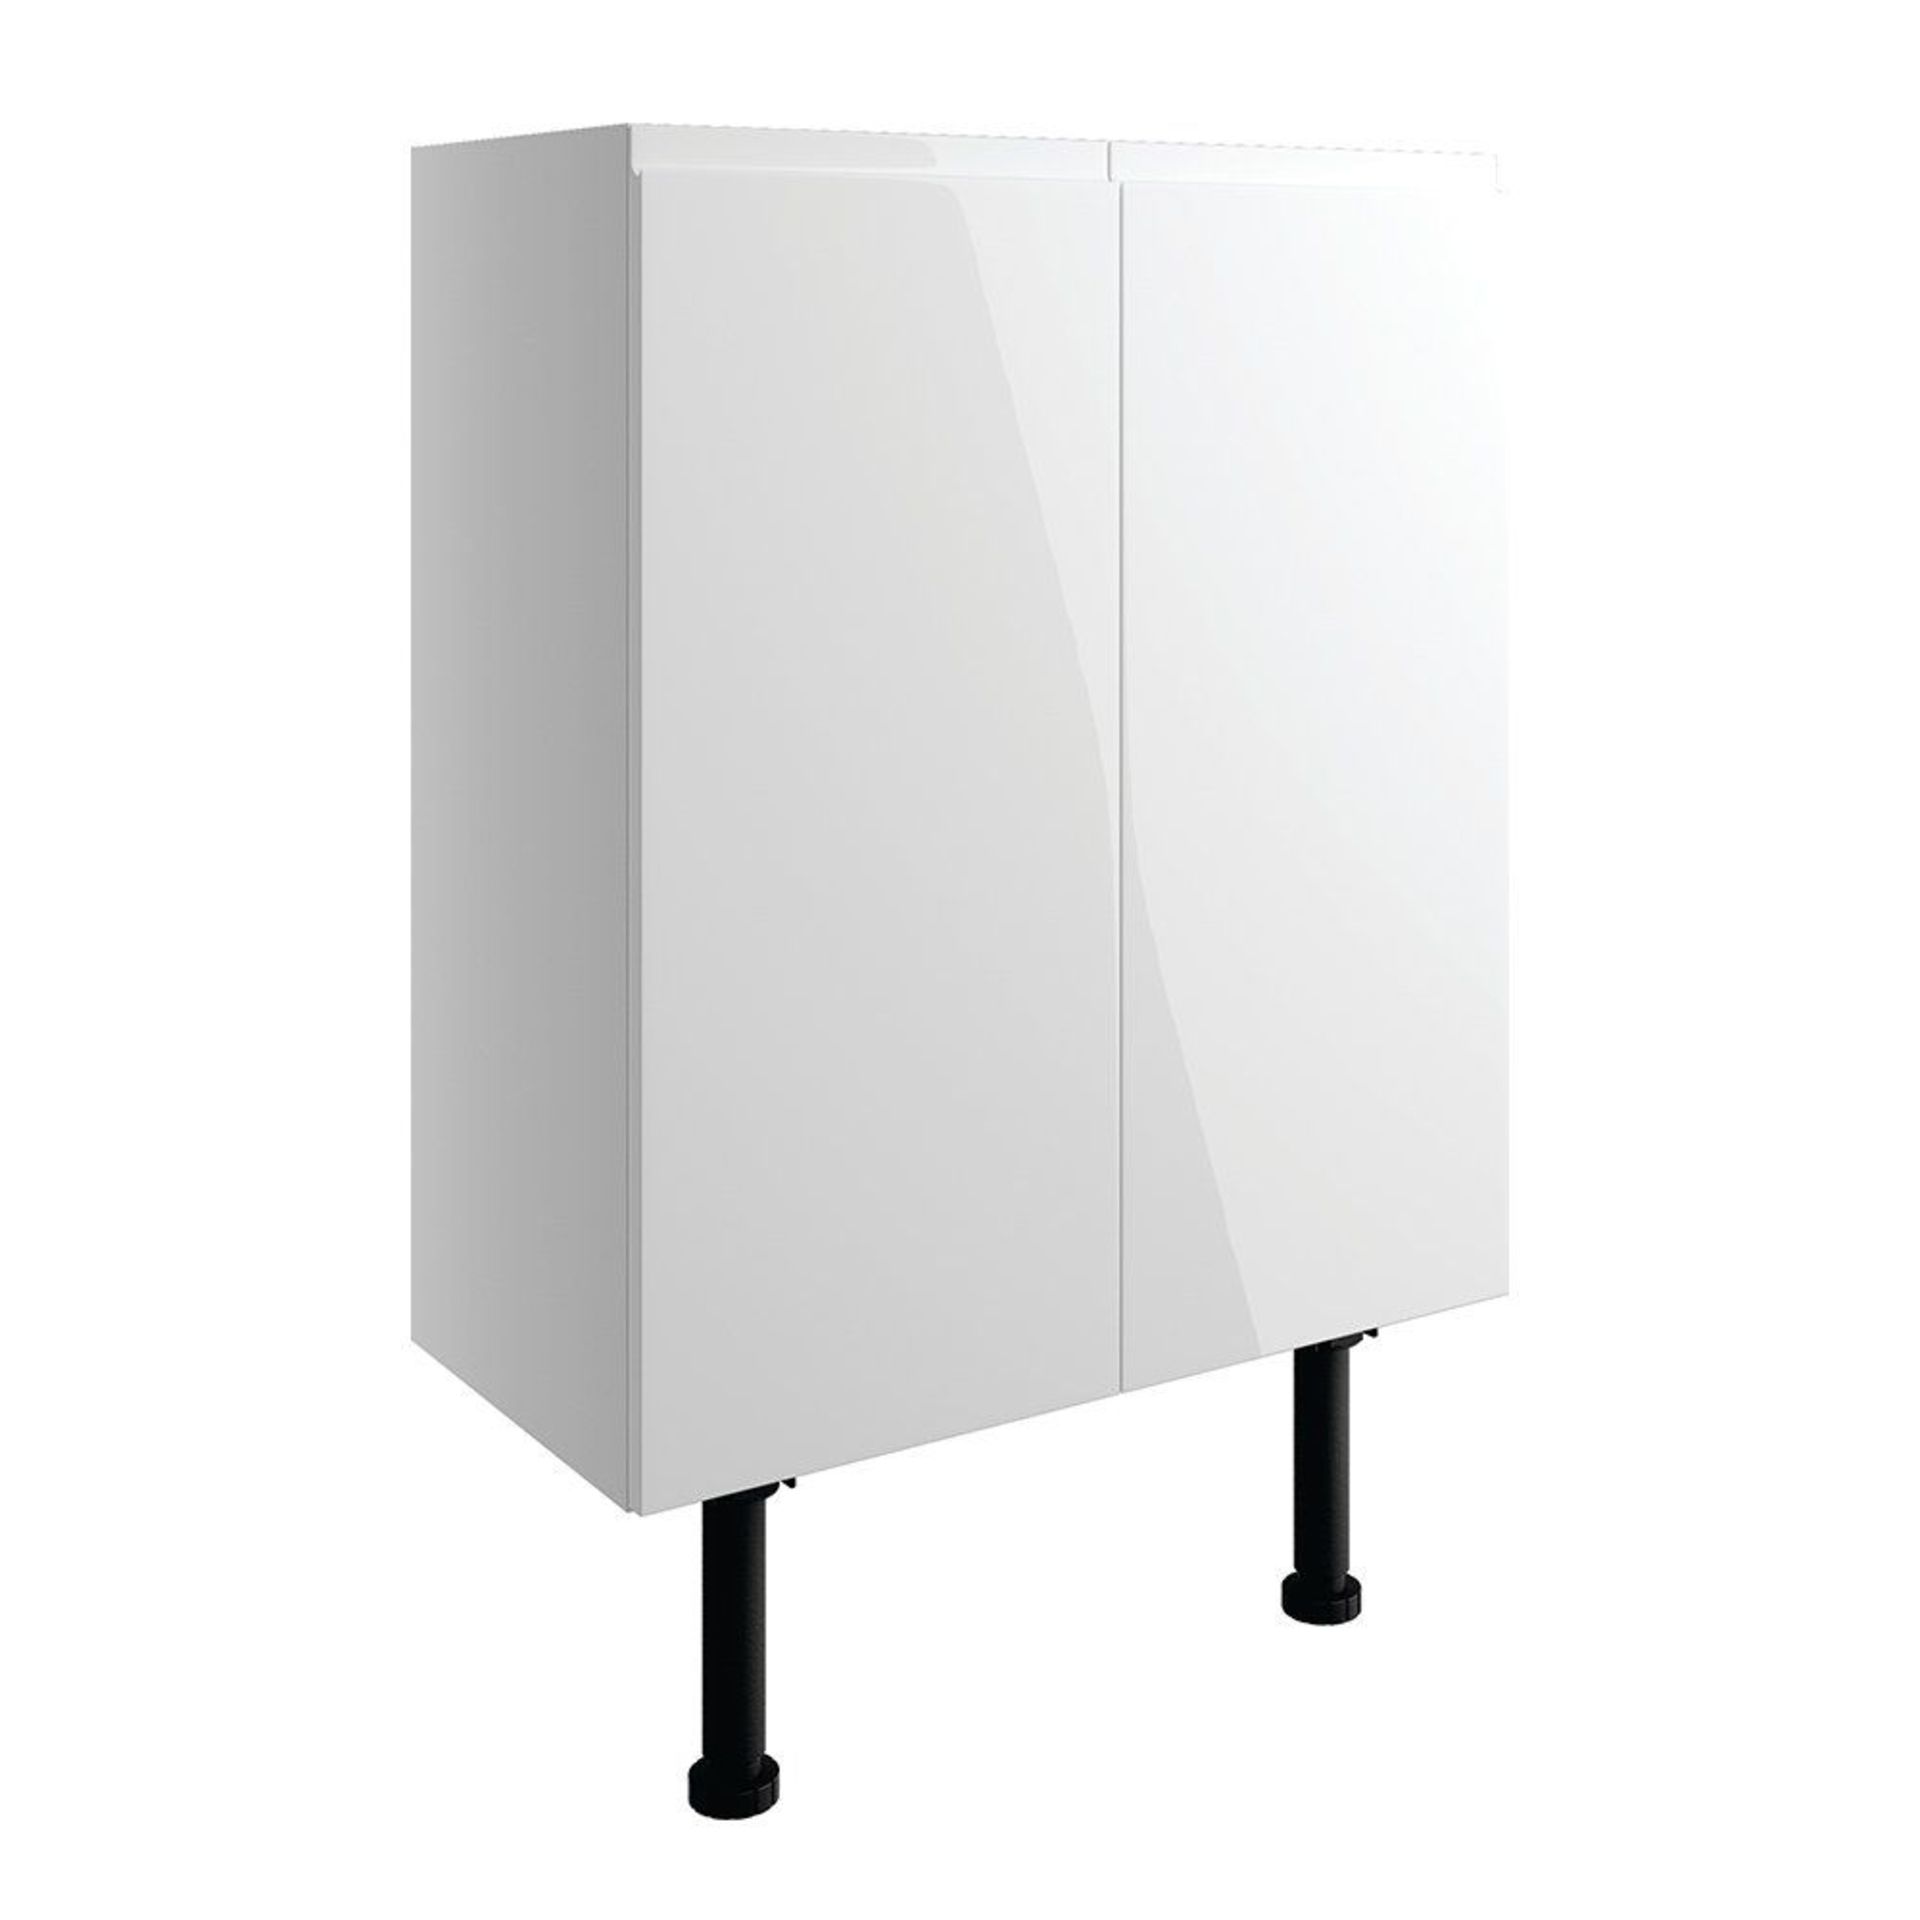 New (Y61) 600mm 2 Door Full Depth Base Unit - White Gloss. Soft Close Fittings Durable 18mm ... - Image 2 of 2